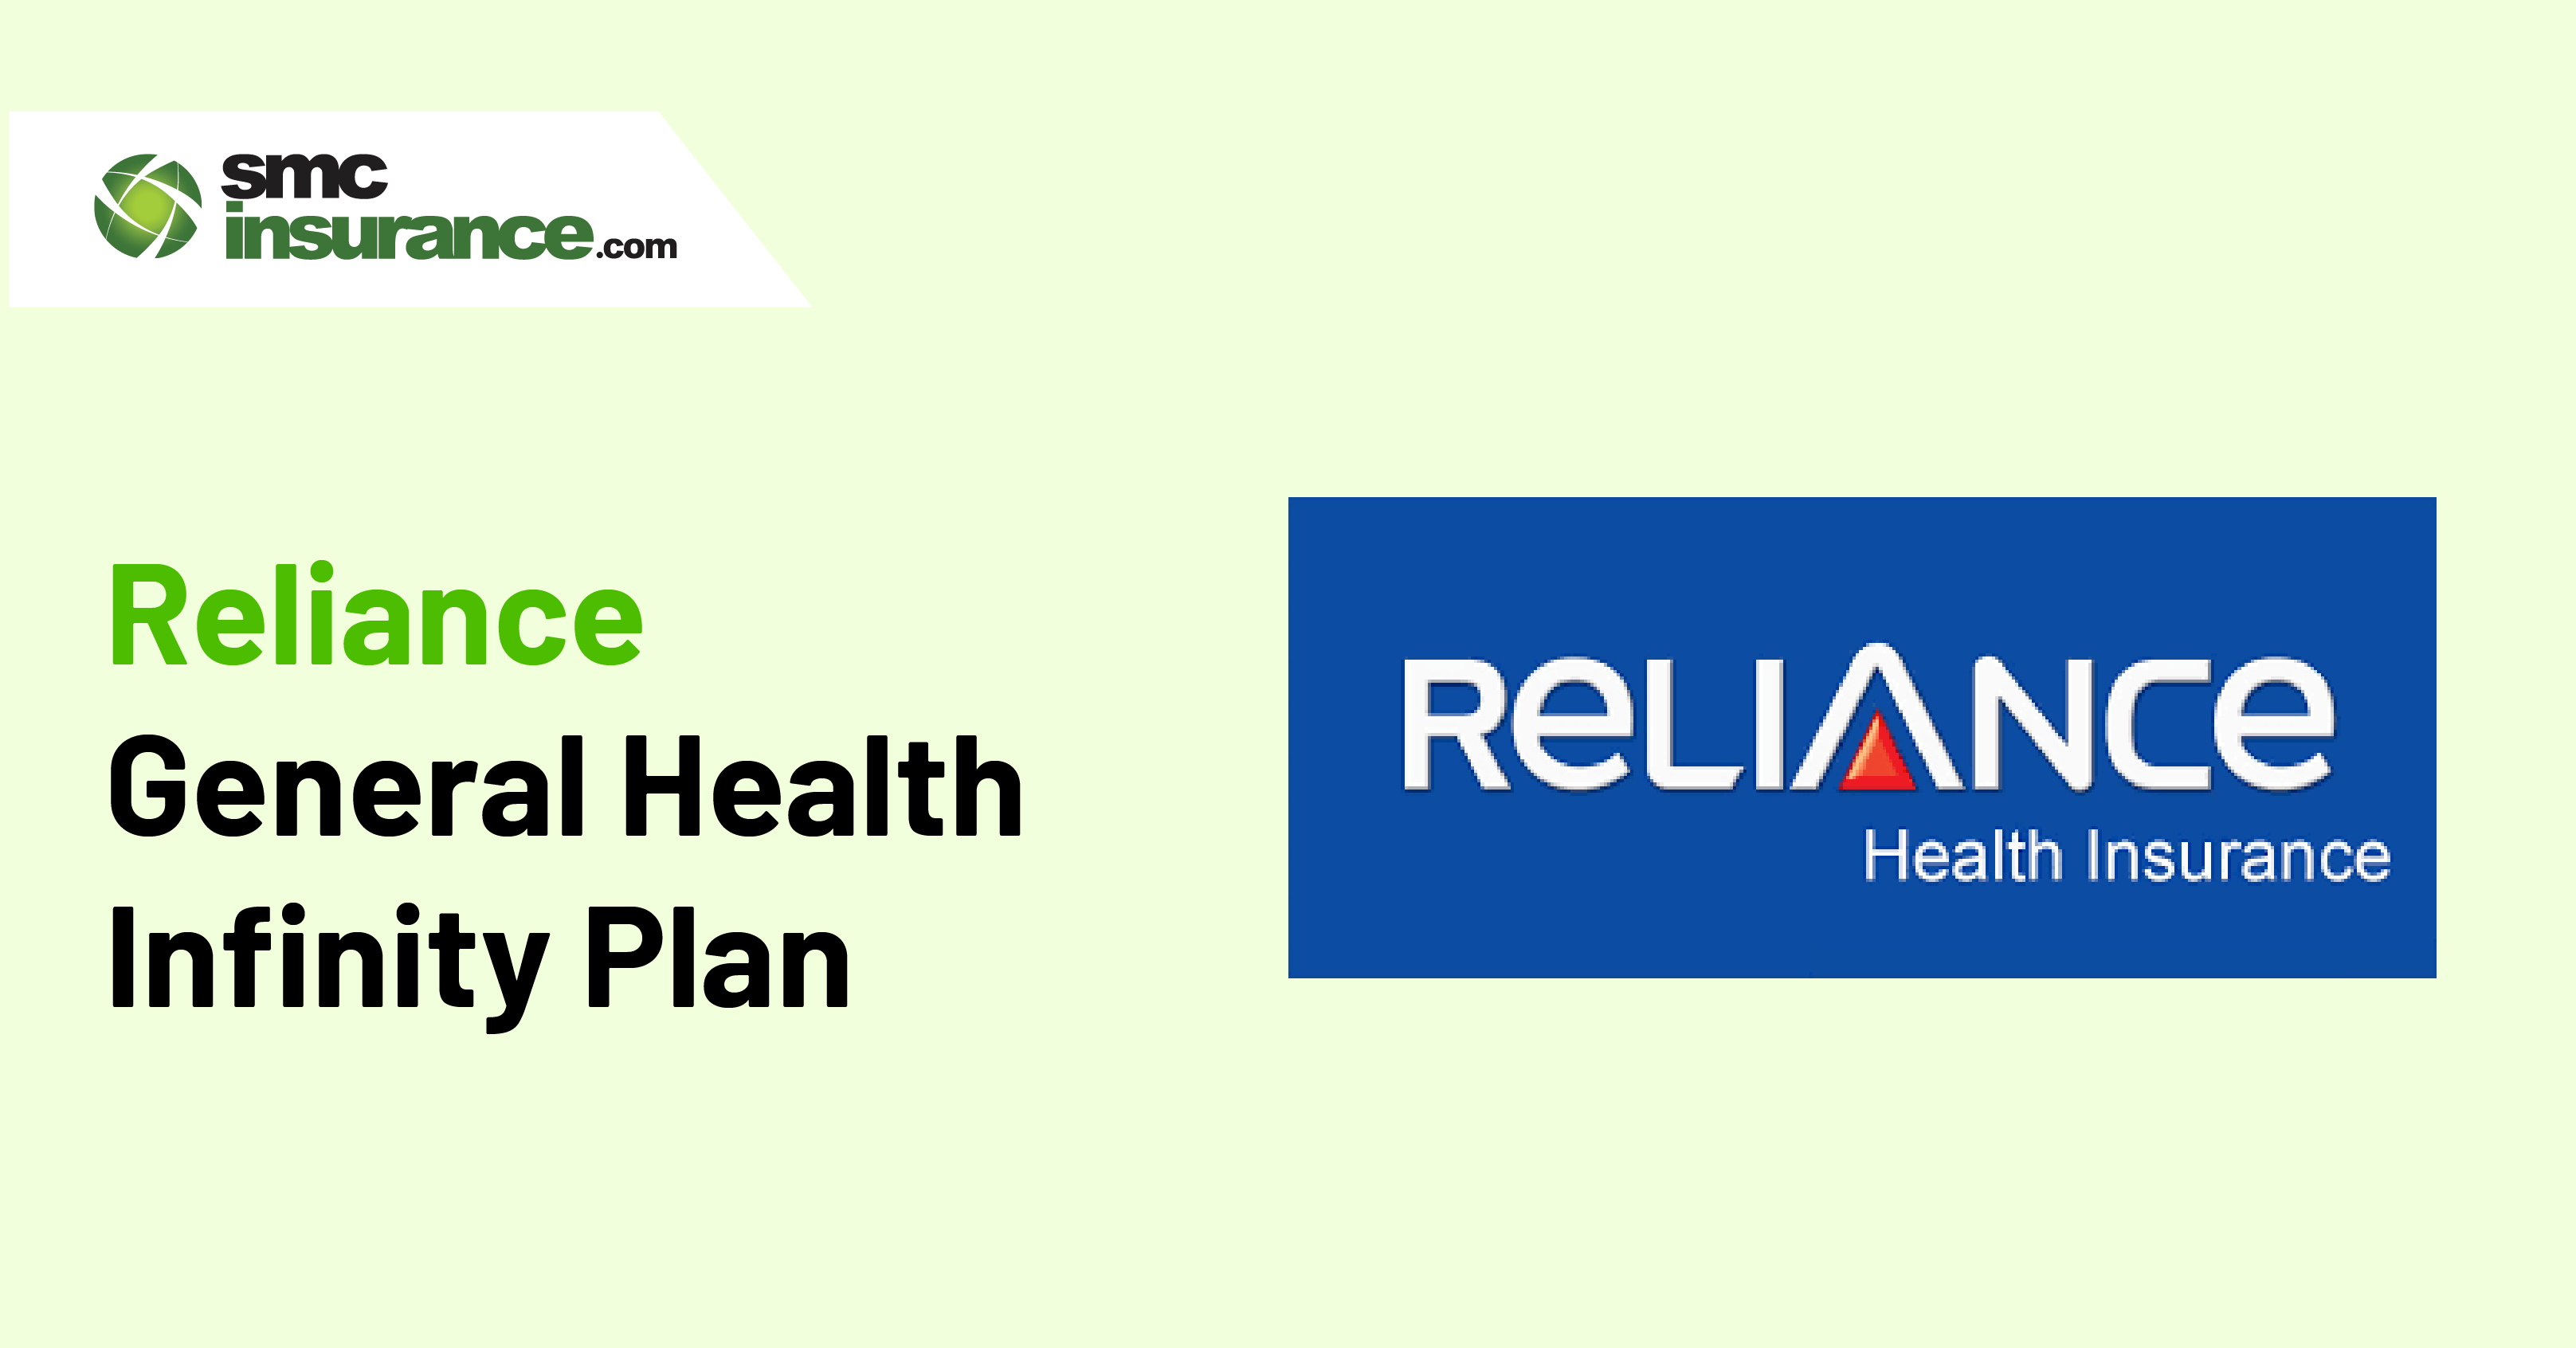 Reliance General Health Infinity